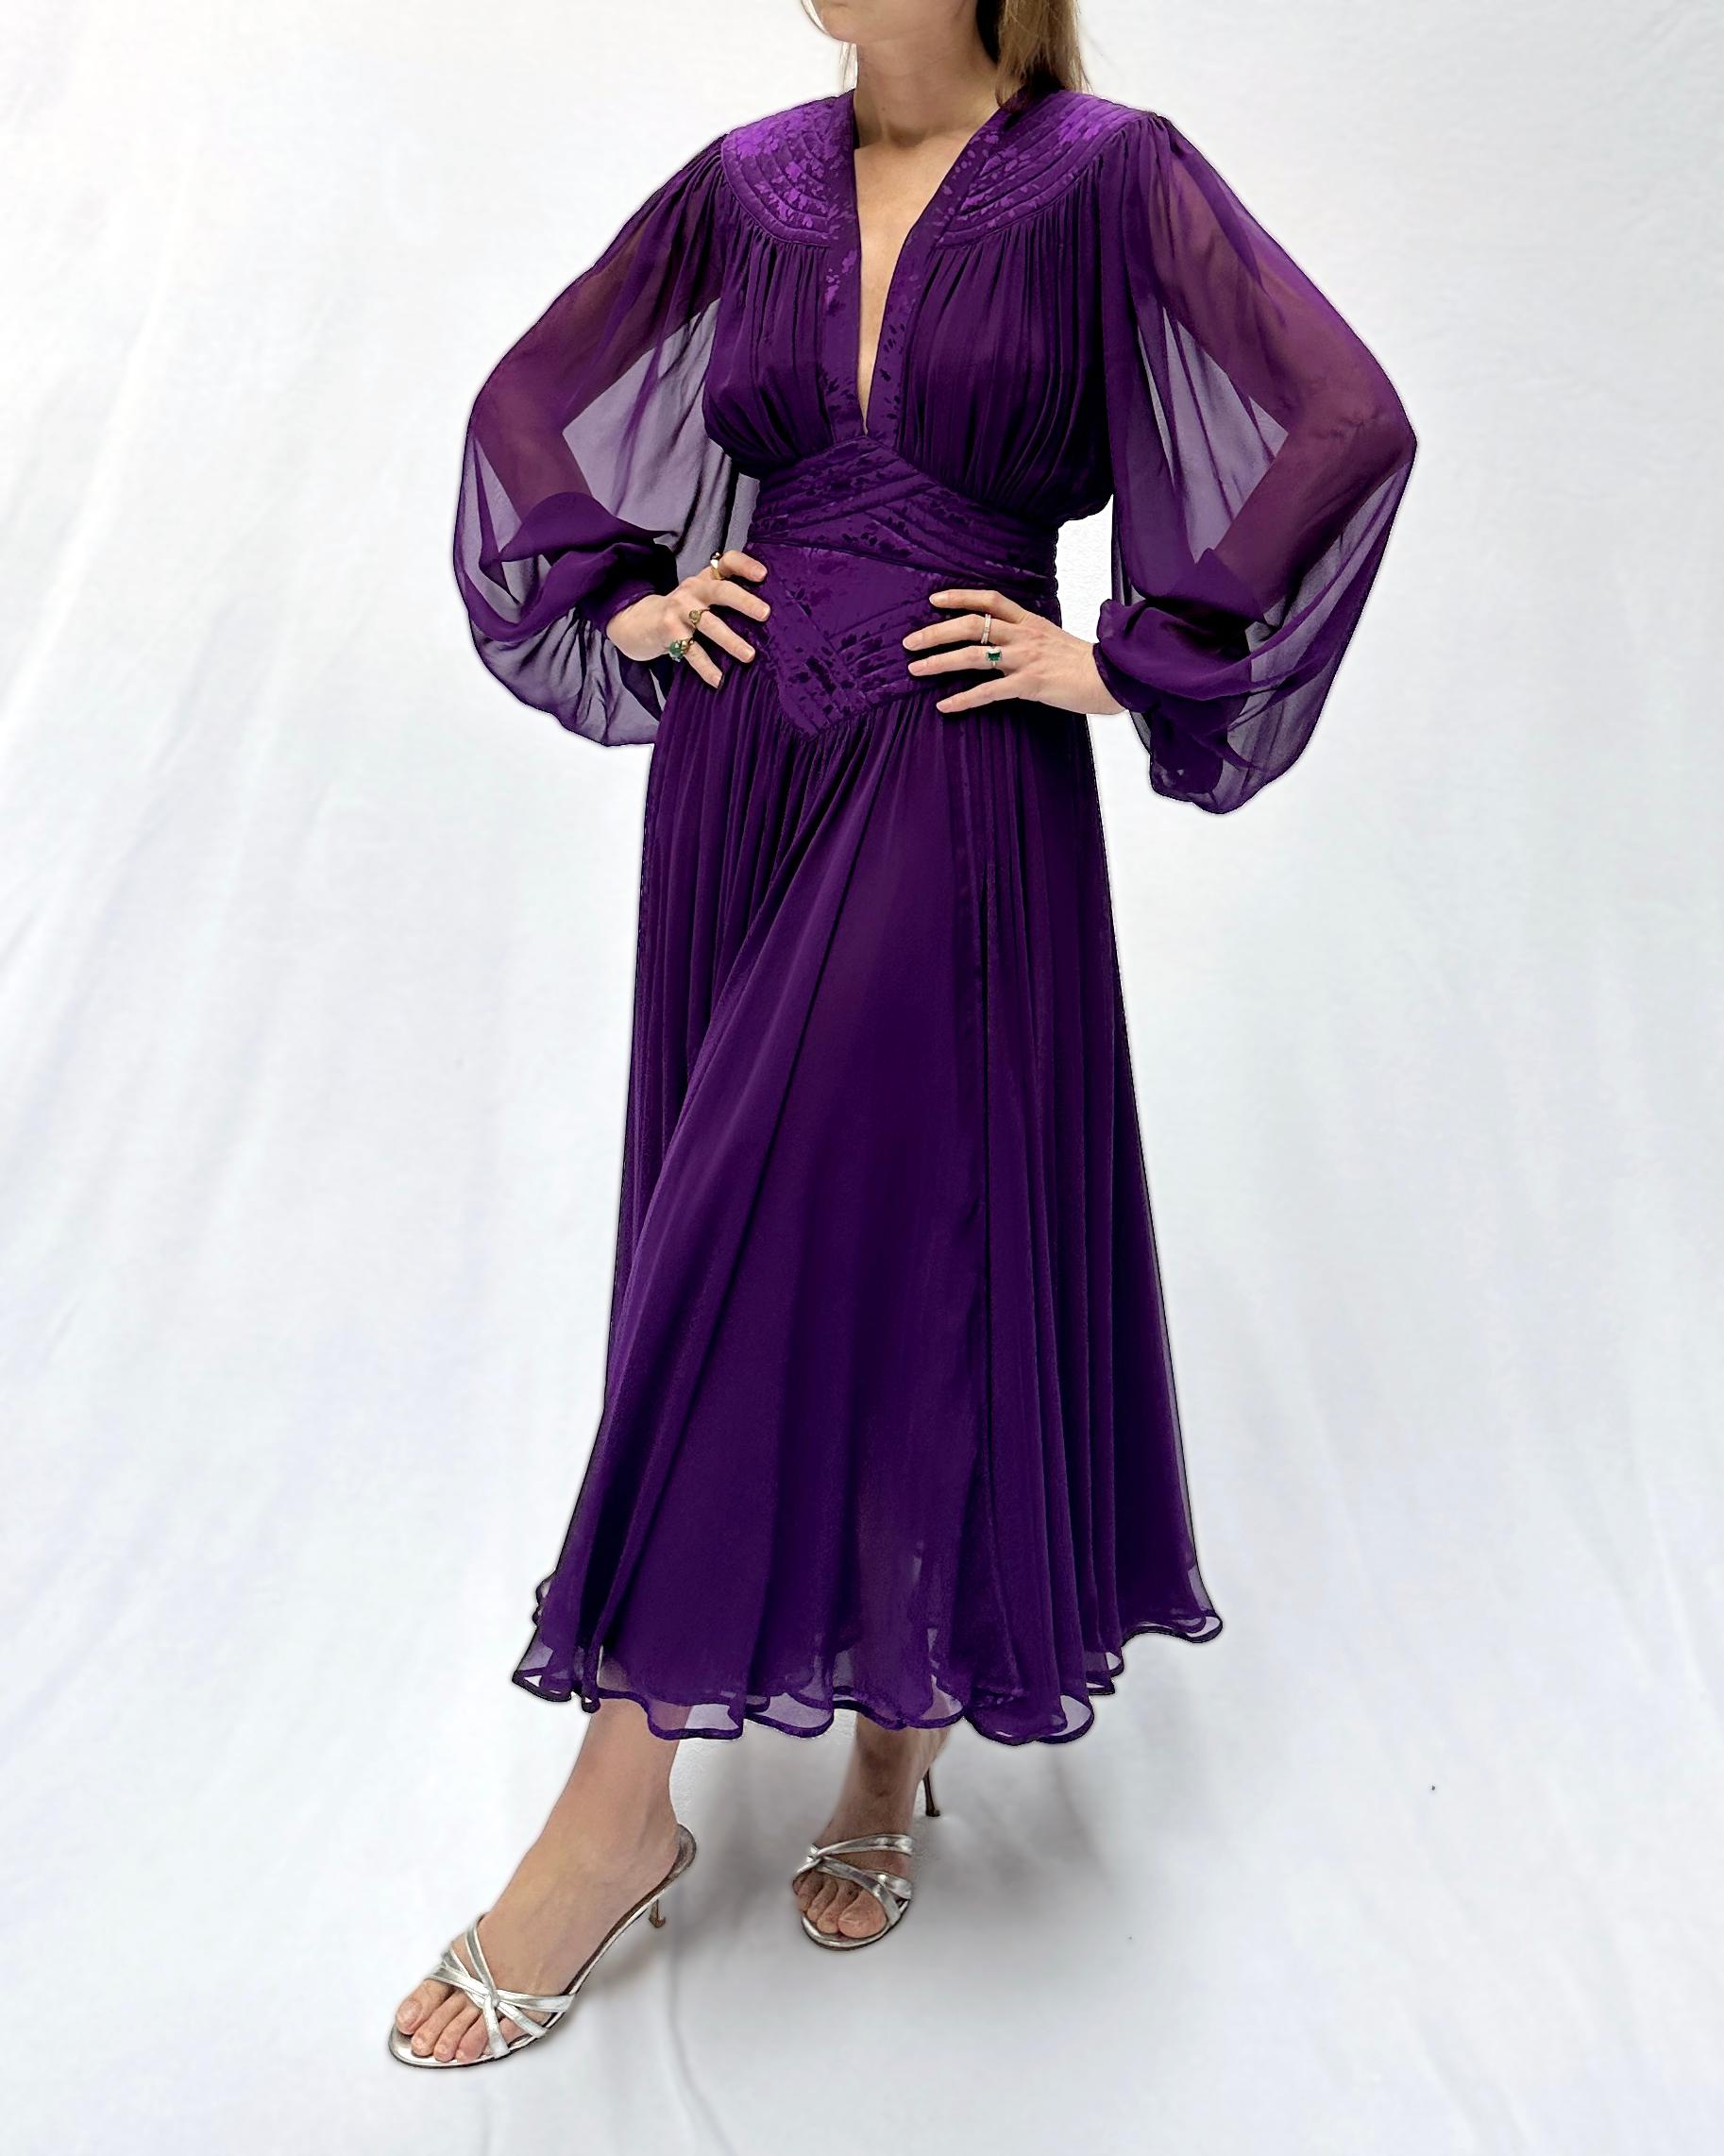 This vintage 1980s Wayne Clark dress is pure magic— the majestic purple color somehow looks amazing on everyone. Wayne Clark is a Canadian designer, known for his custom couture designs and glamorous eveningwear. The diamond-shaped quilted bodice